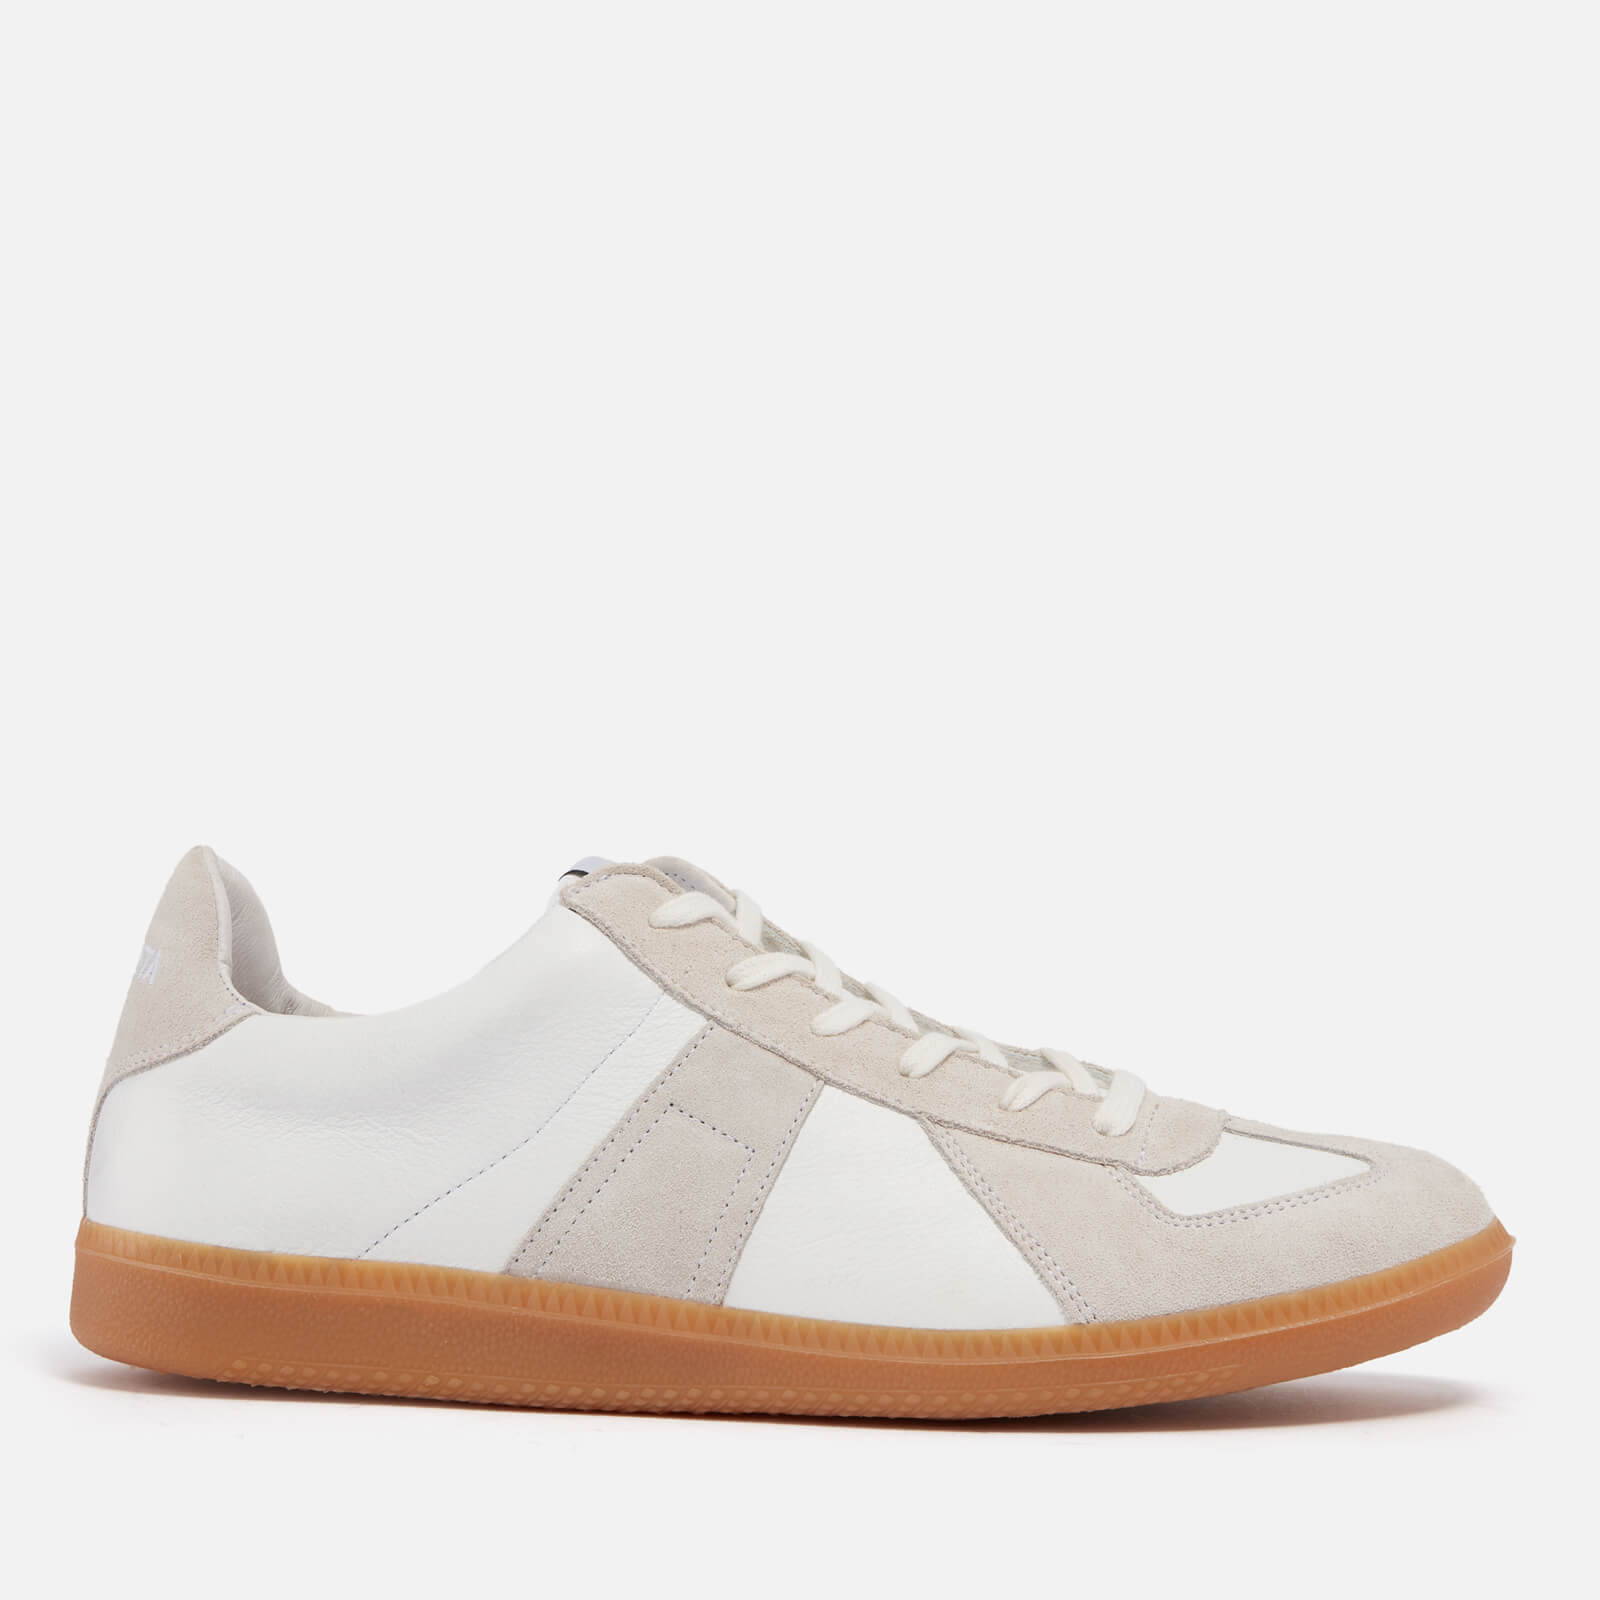 Novesta Men’s German Army Leather and Suede Trainers